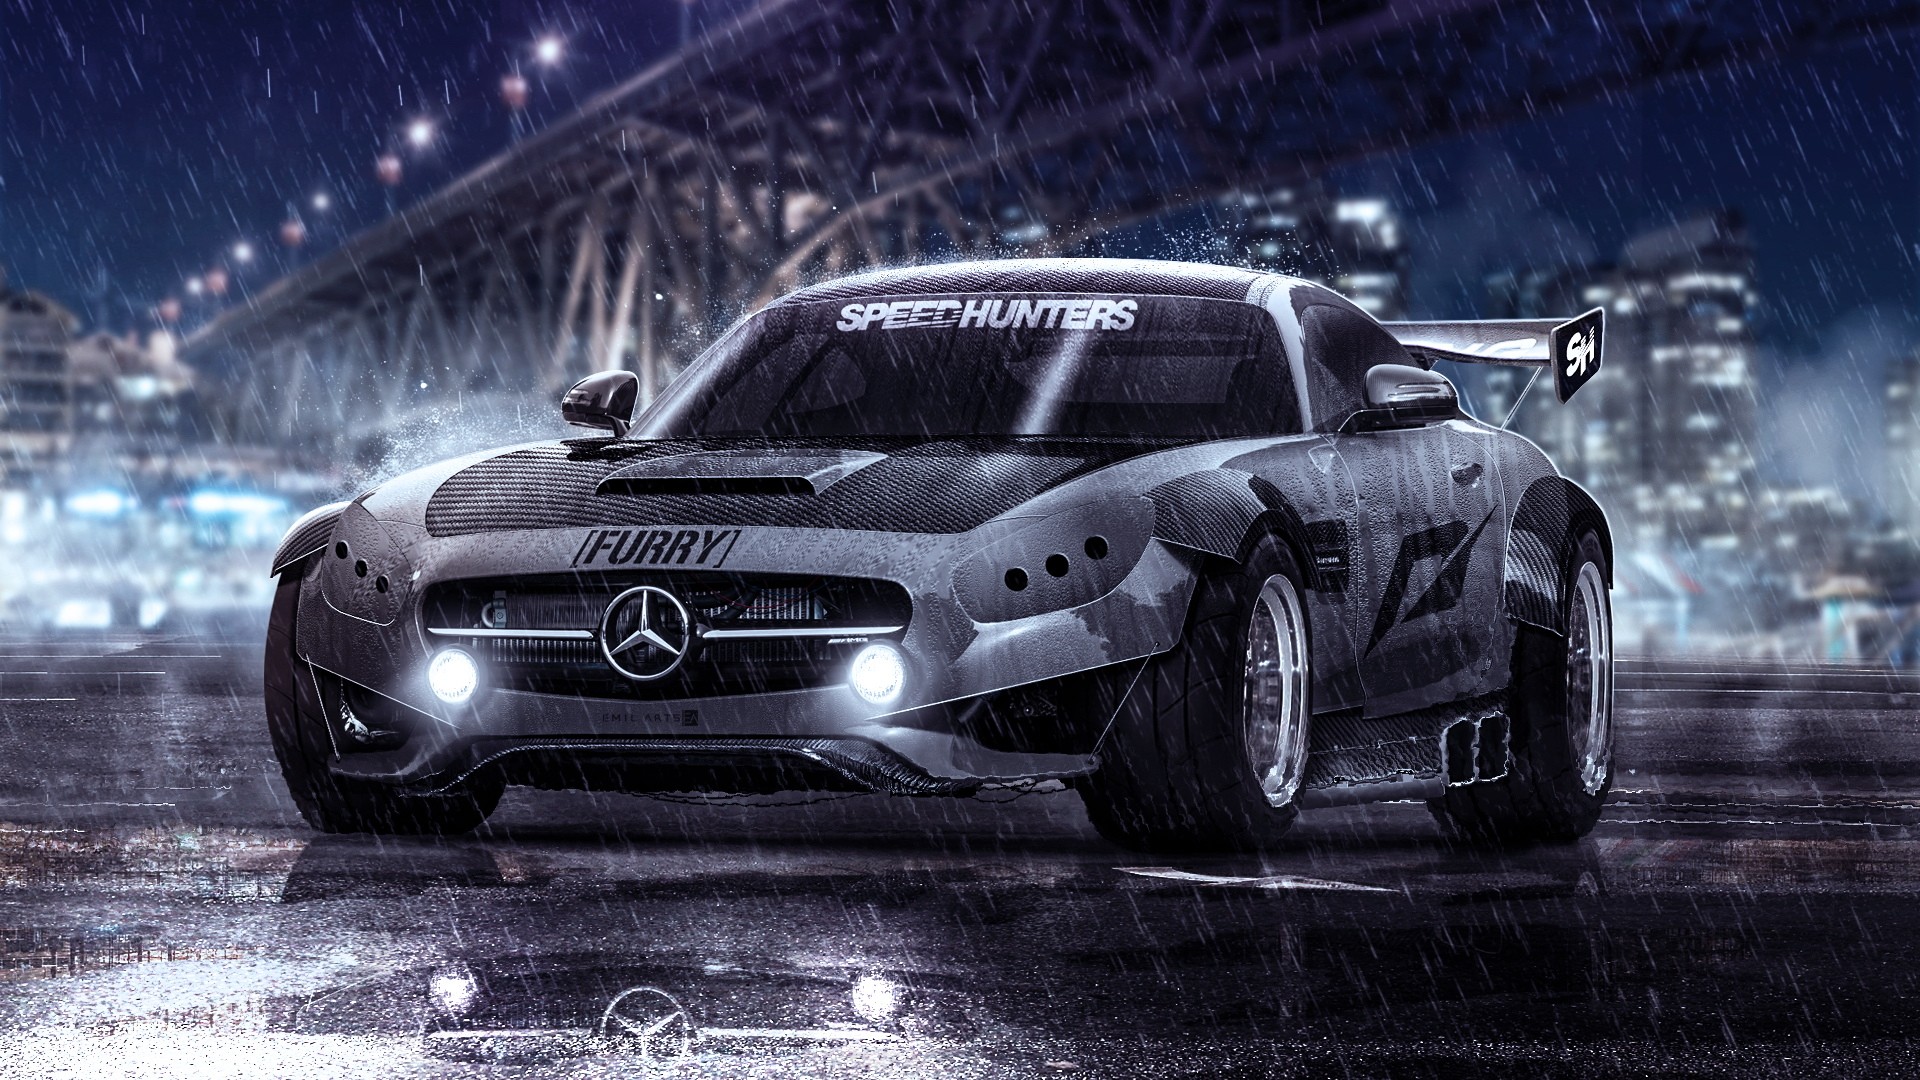 General 1920x1080 Speedhunters car tuning Need for Speed Mercedes-Benz SLS AMG rain depth of field Mercedes-Benz vehicle German cars Grand Tour